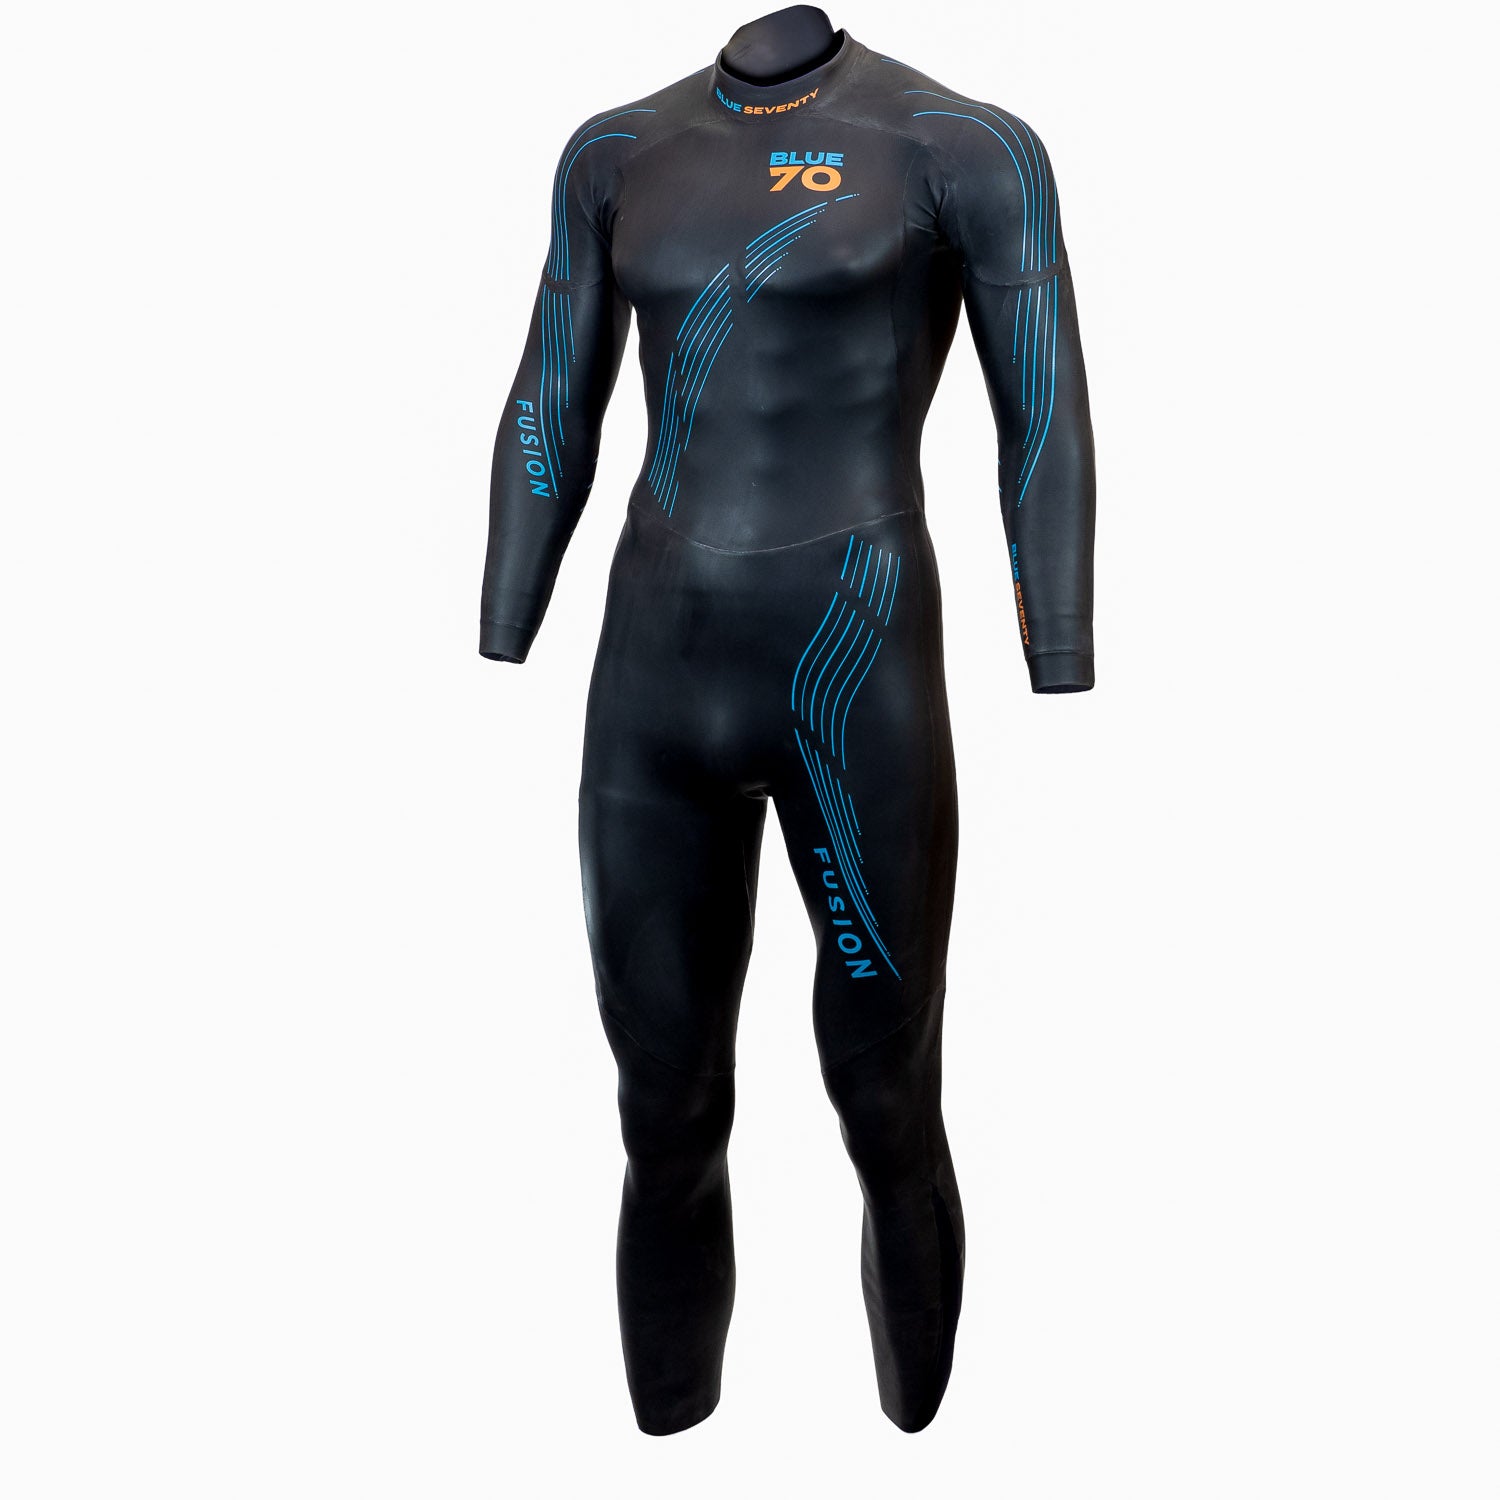 Skins Men's A200 Thermal Compression All-In-One-Body Suit - Black/Neon Blue